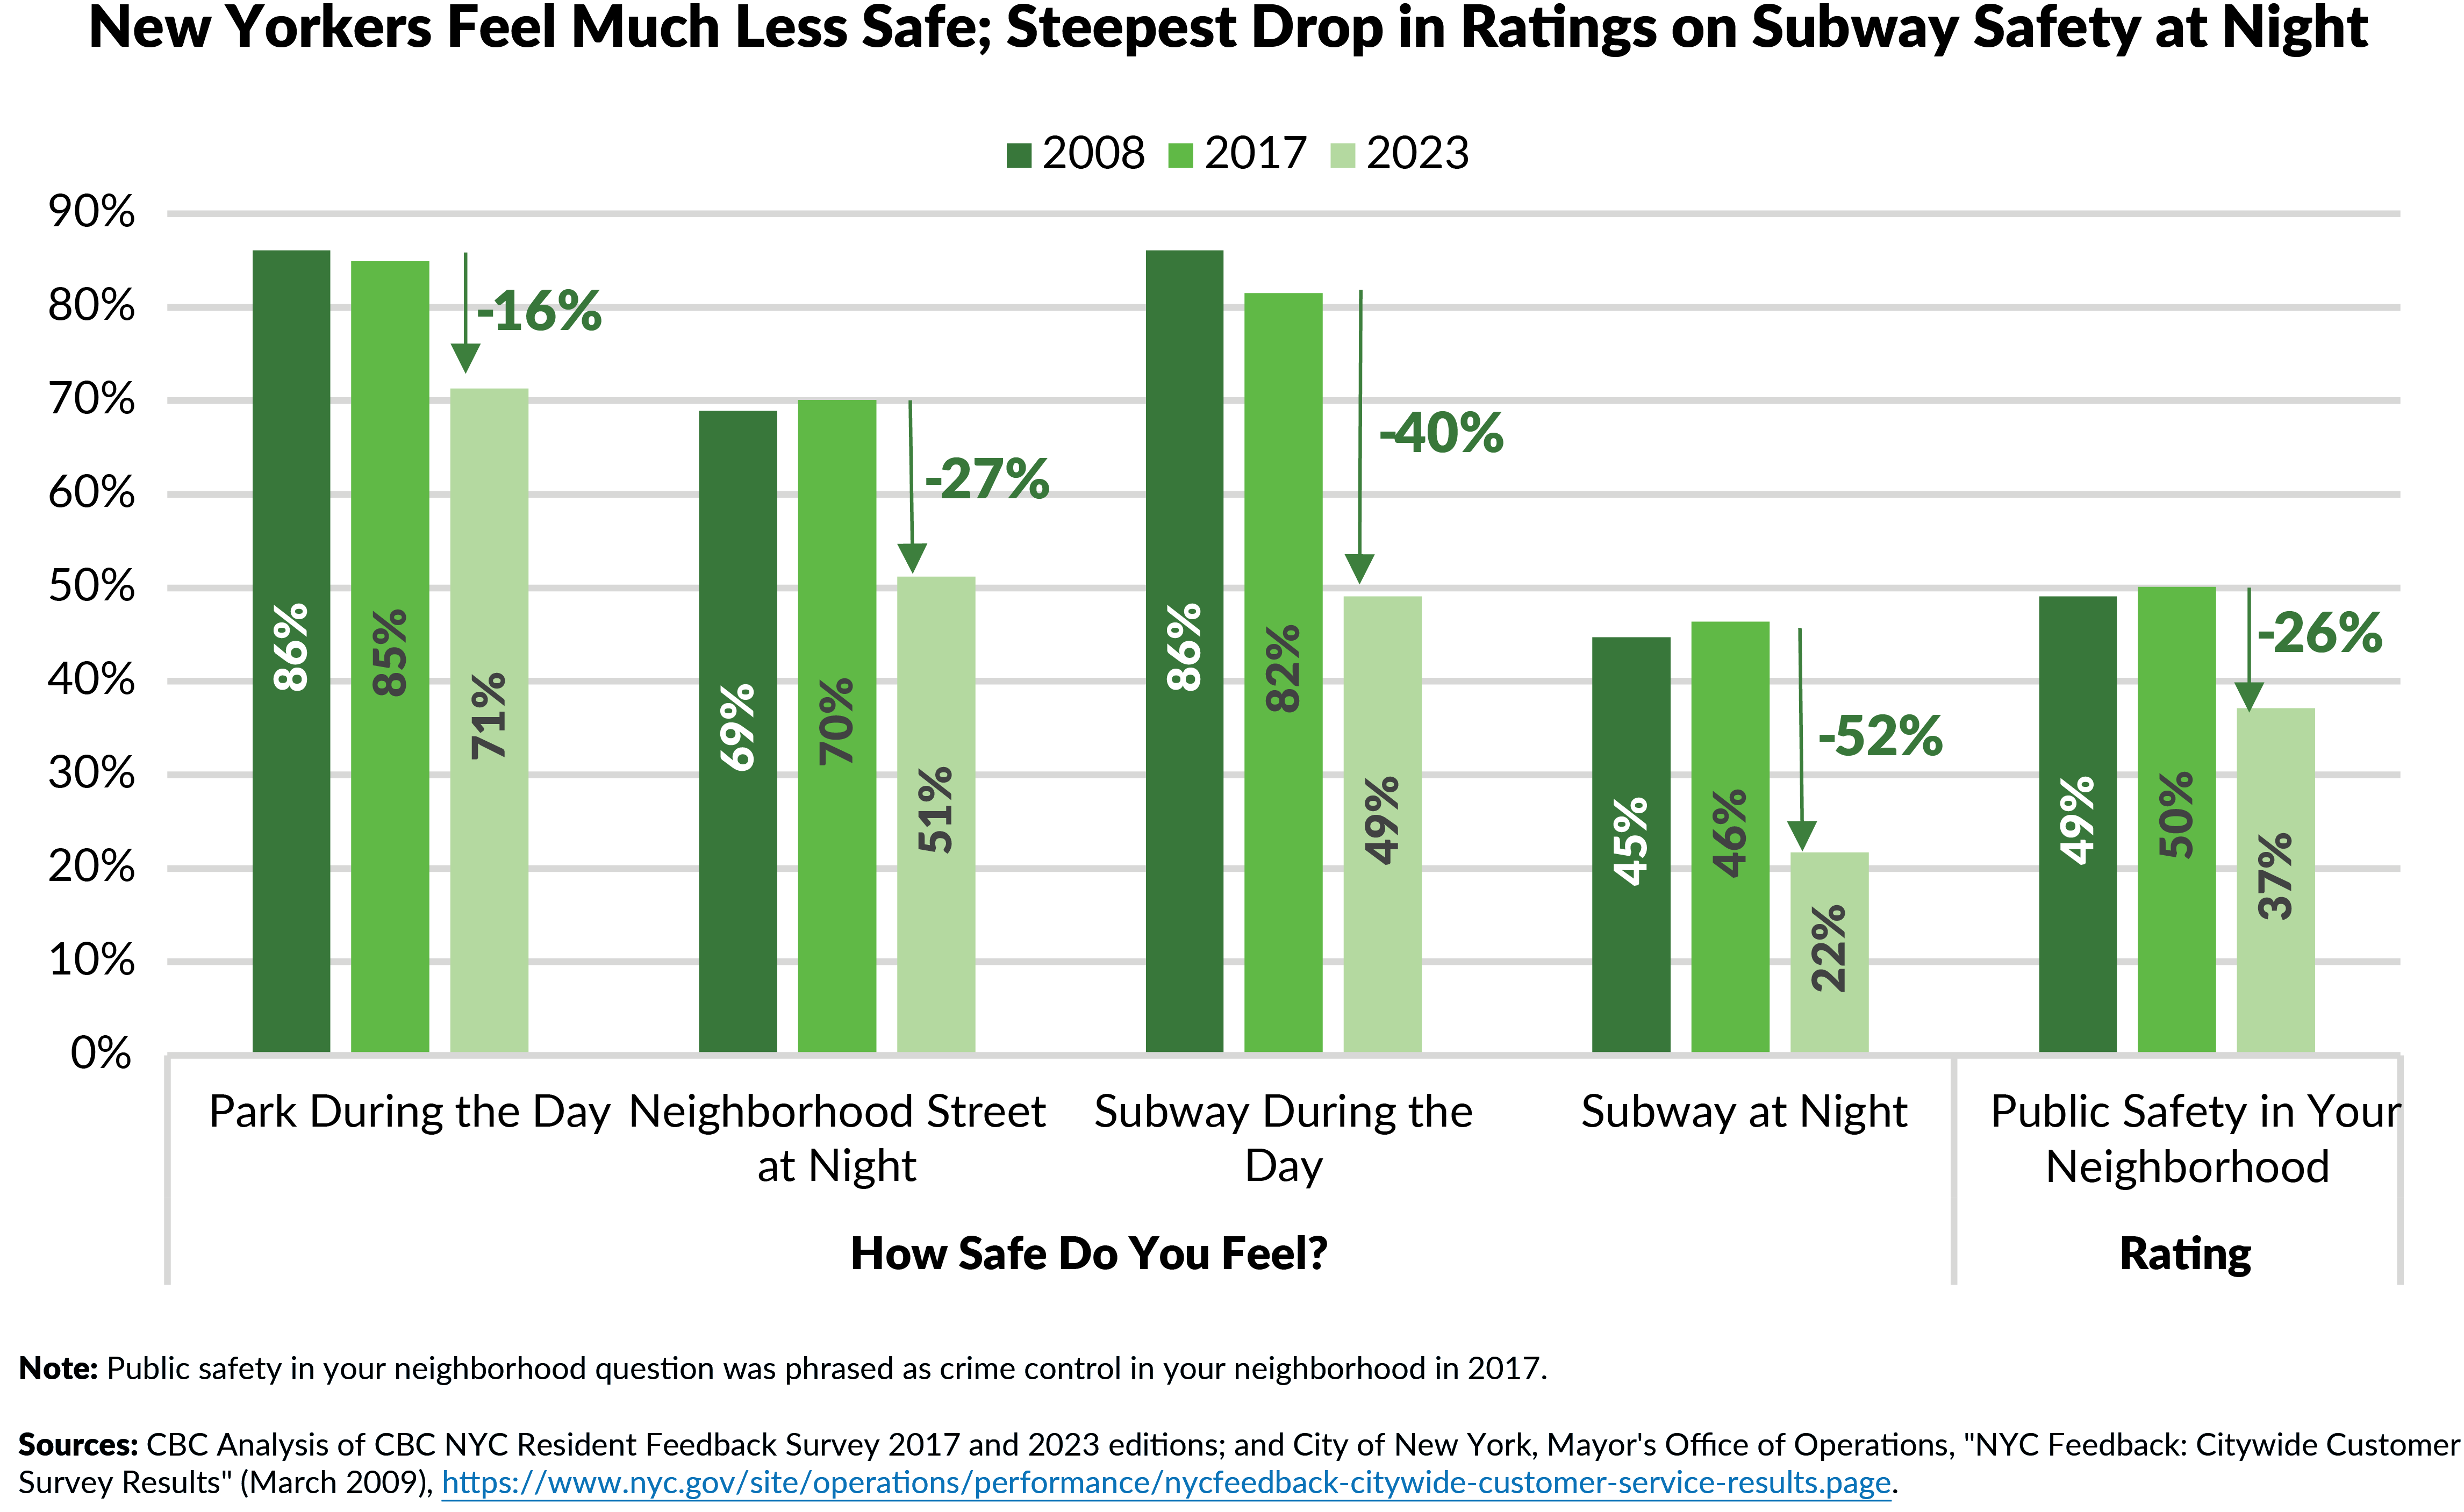 New Yorkers Feel Much Less Safe